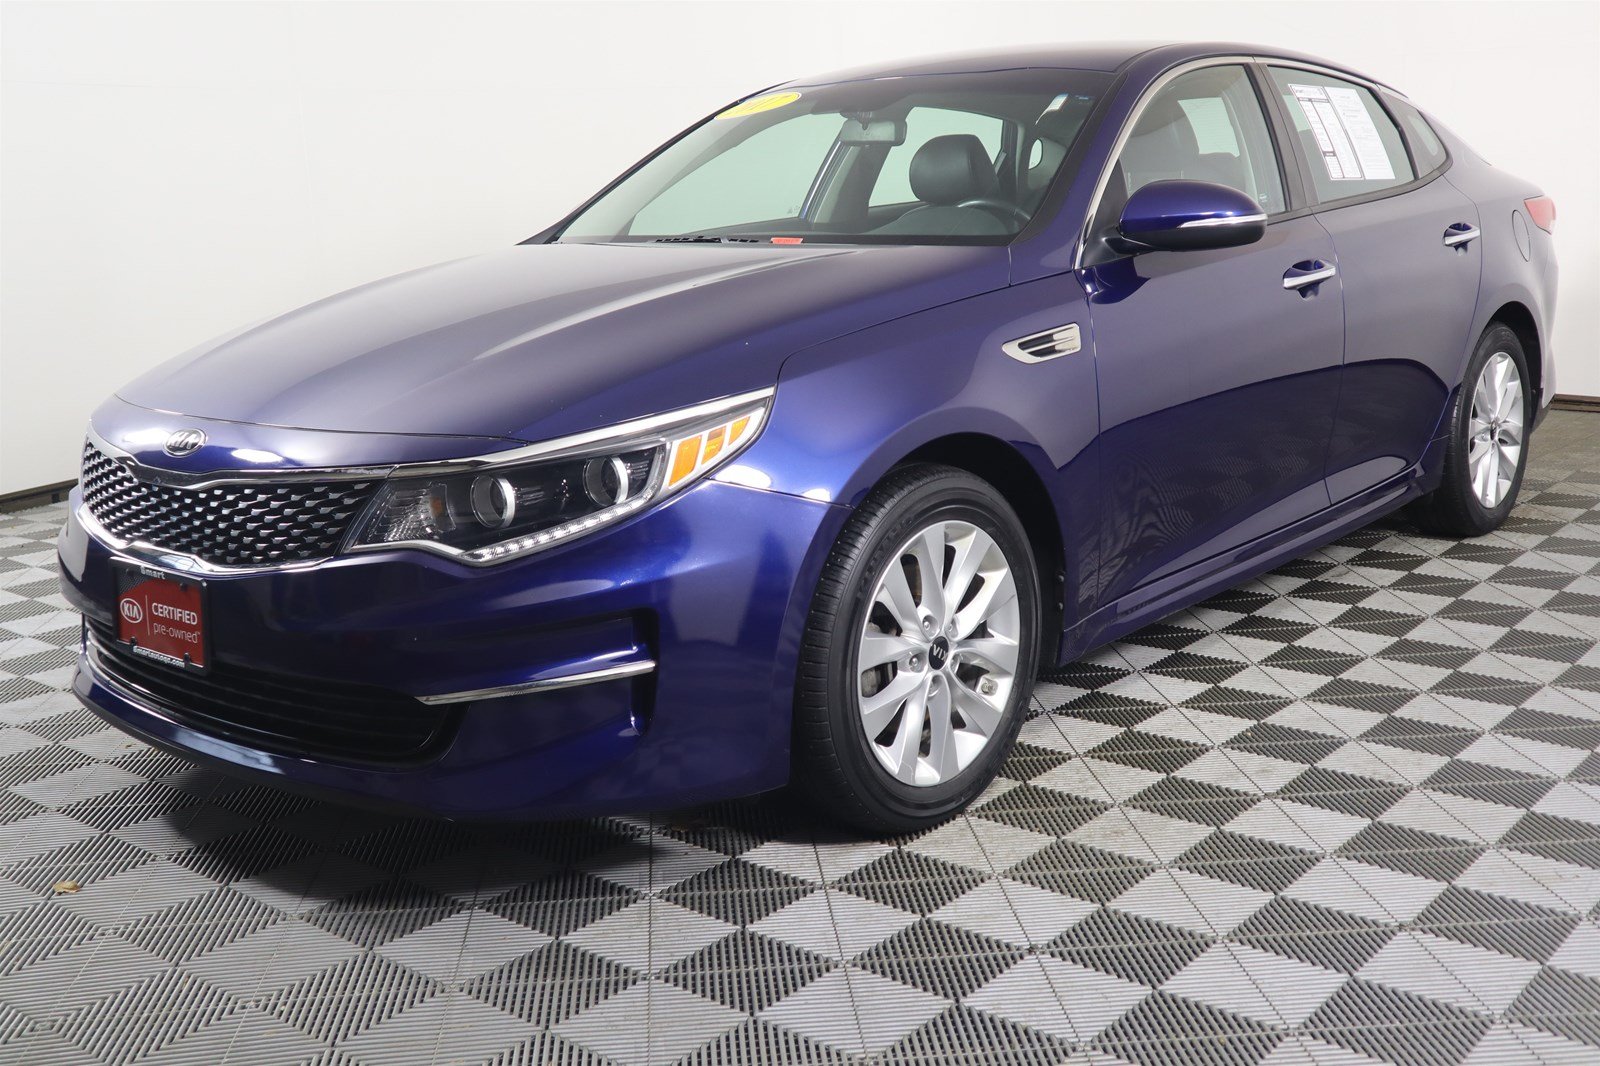 Certified Pre-Owned 2017 Kia Optima EX 4dr Car in Davenport #K17165A ...